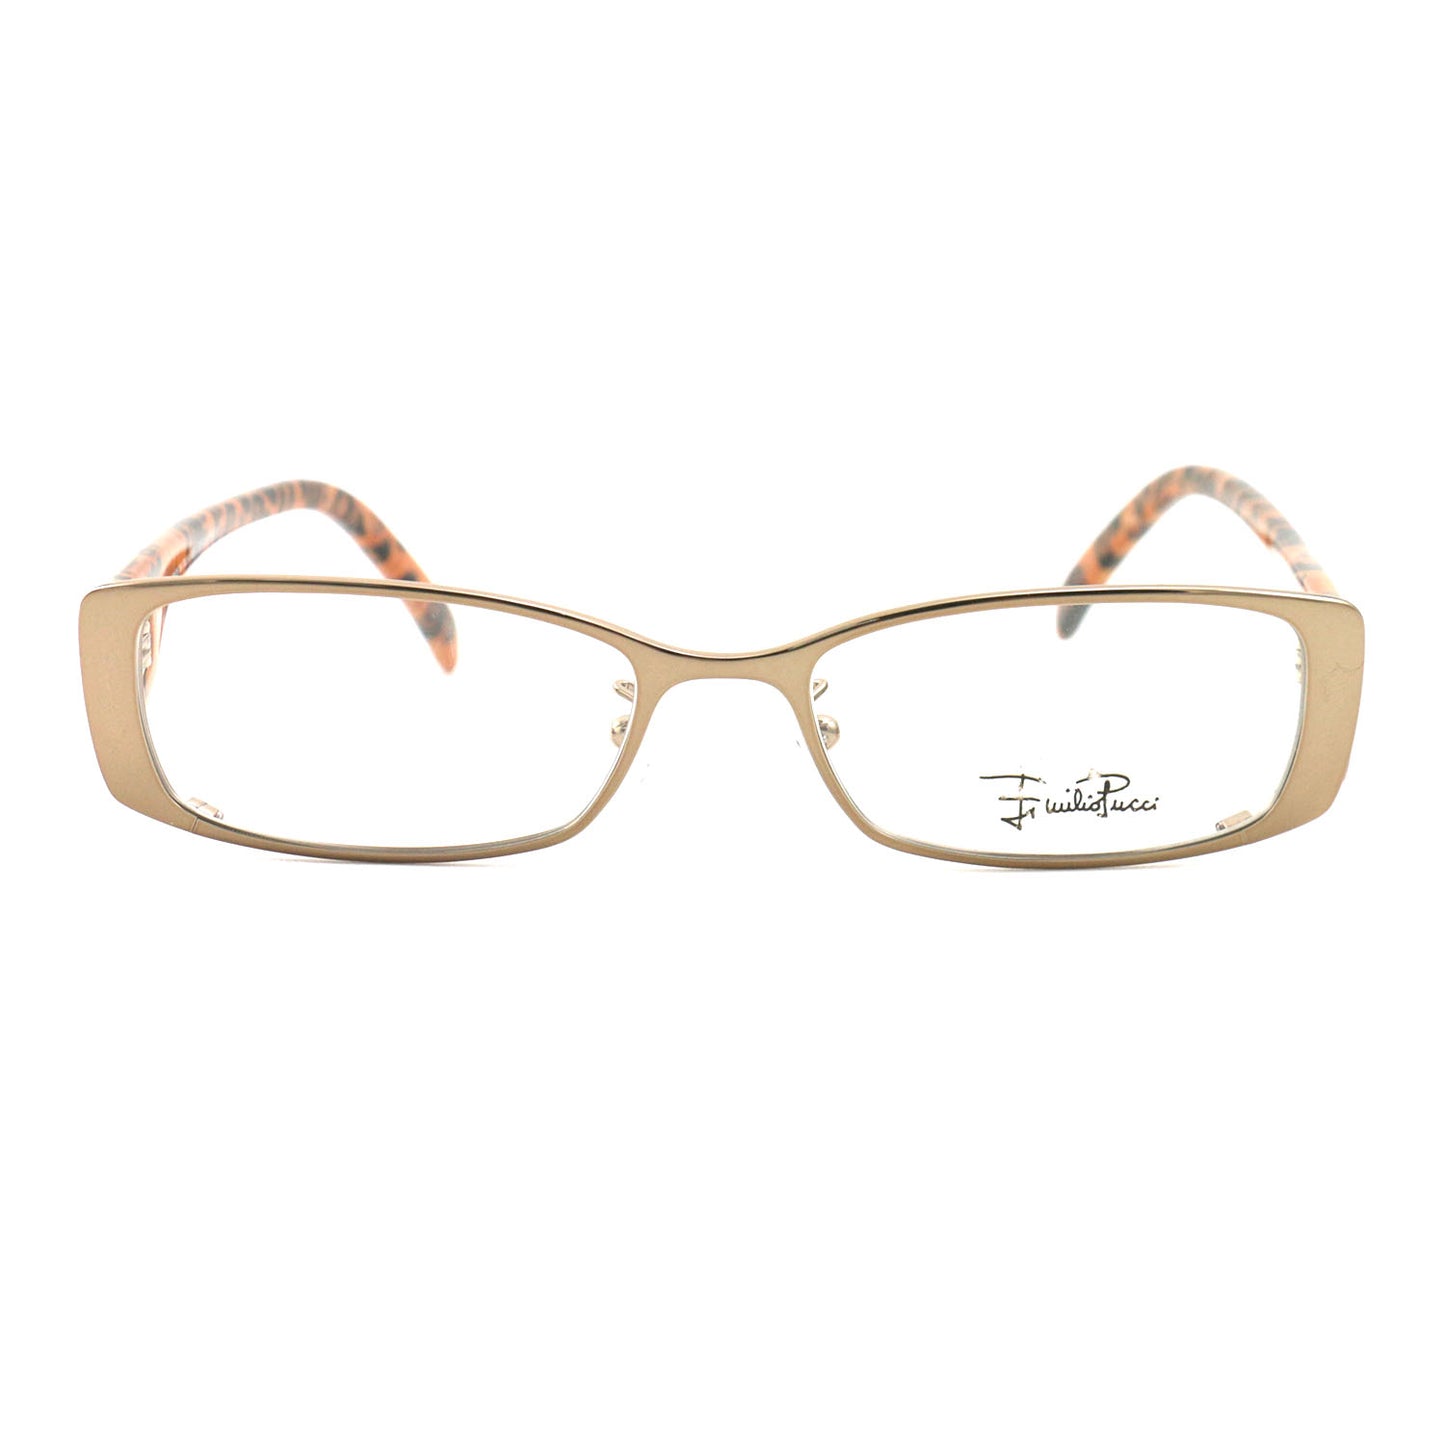 Emilio Pucci Womens Eyeglasses EP2140 207 Gold/Brown 50 16 140 Frames Rectangle